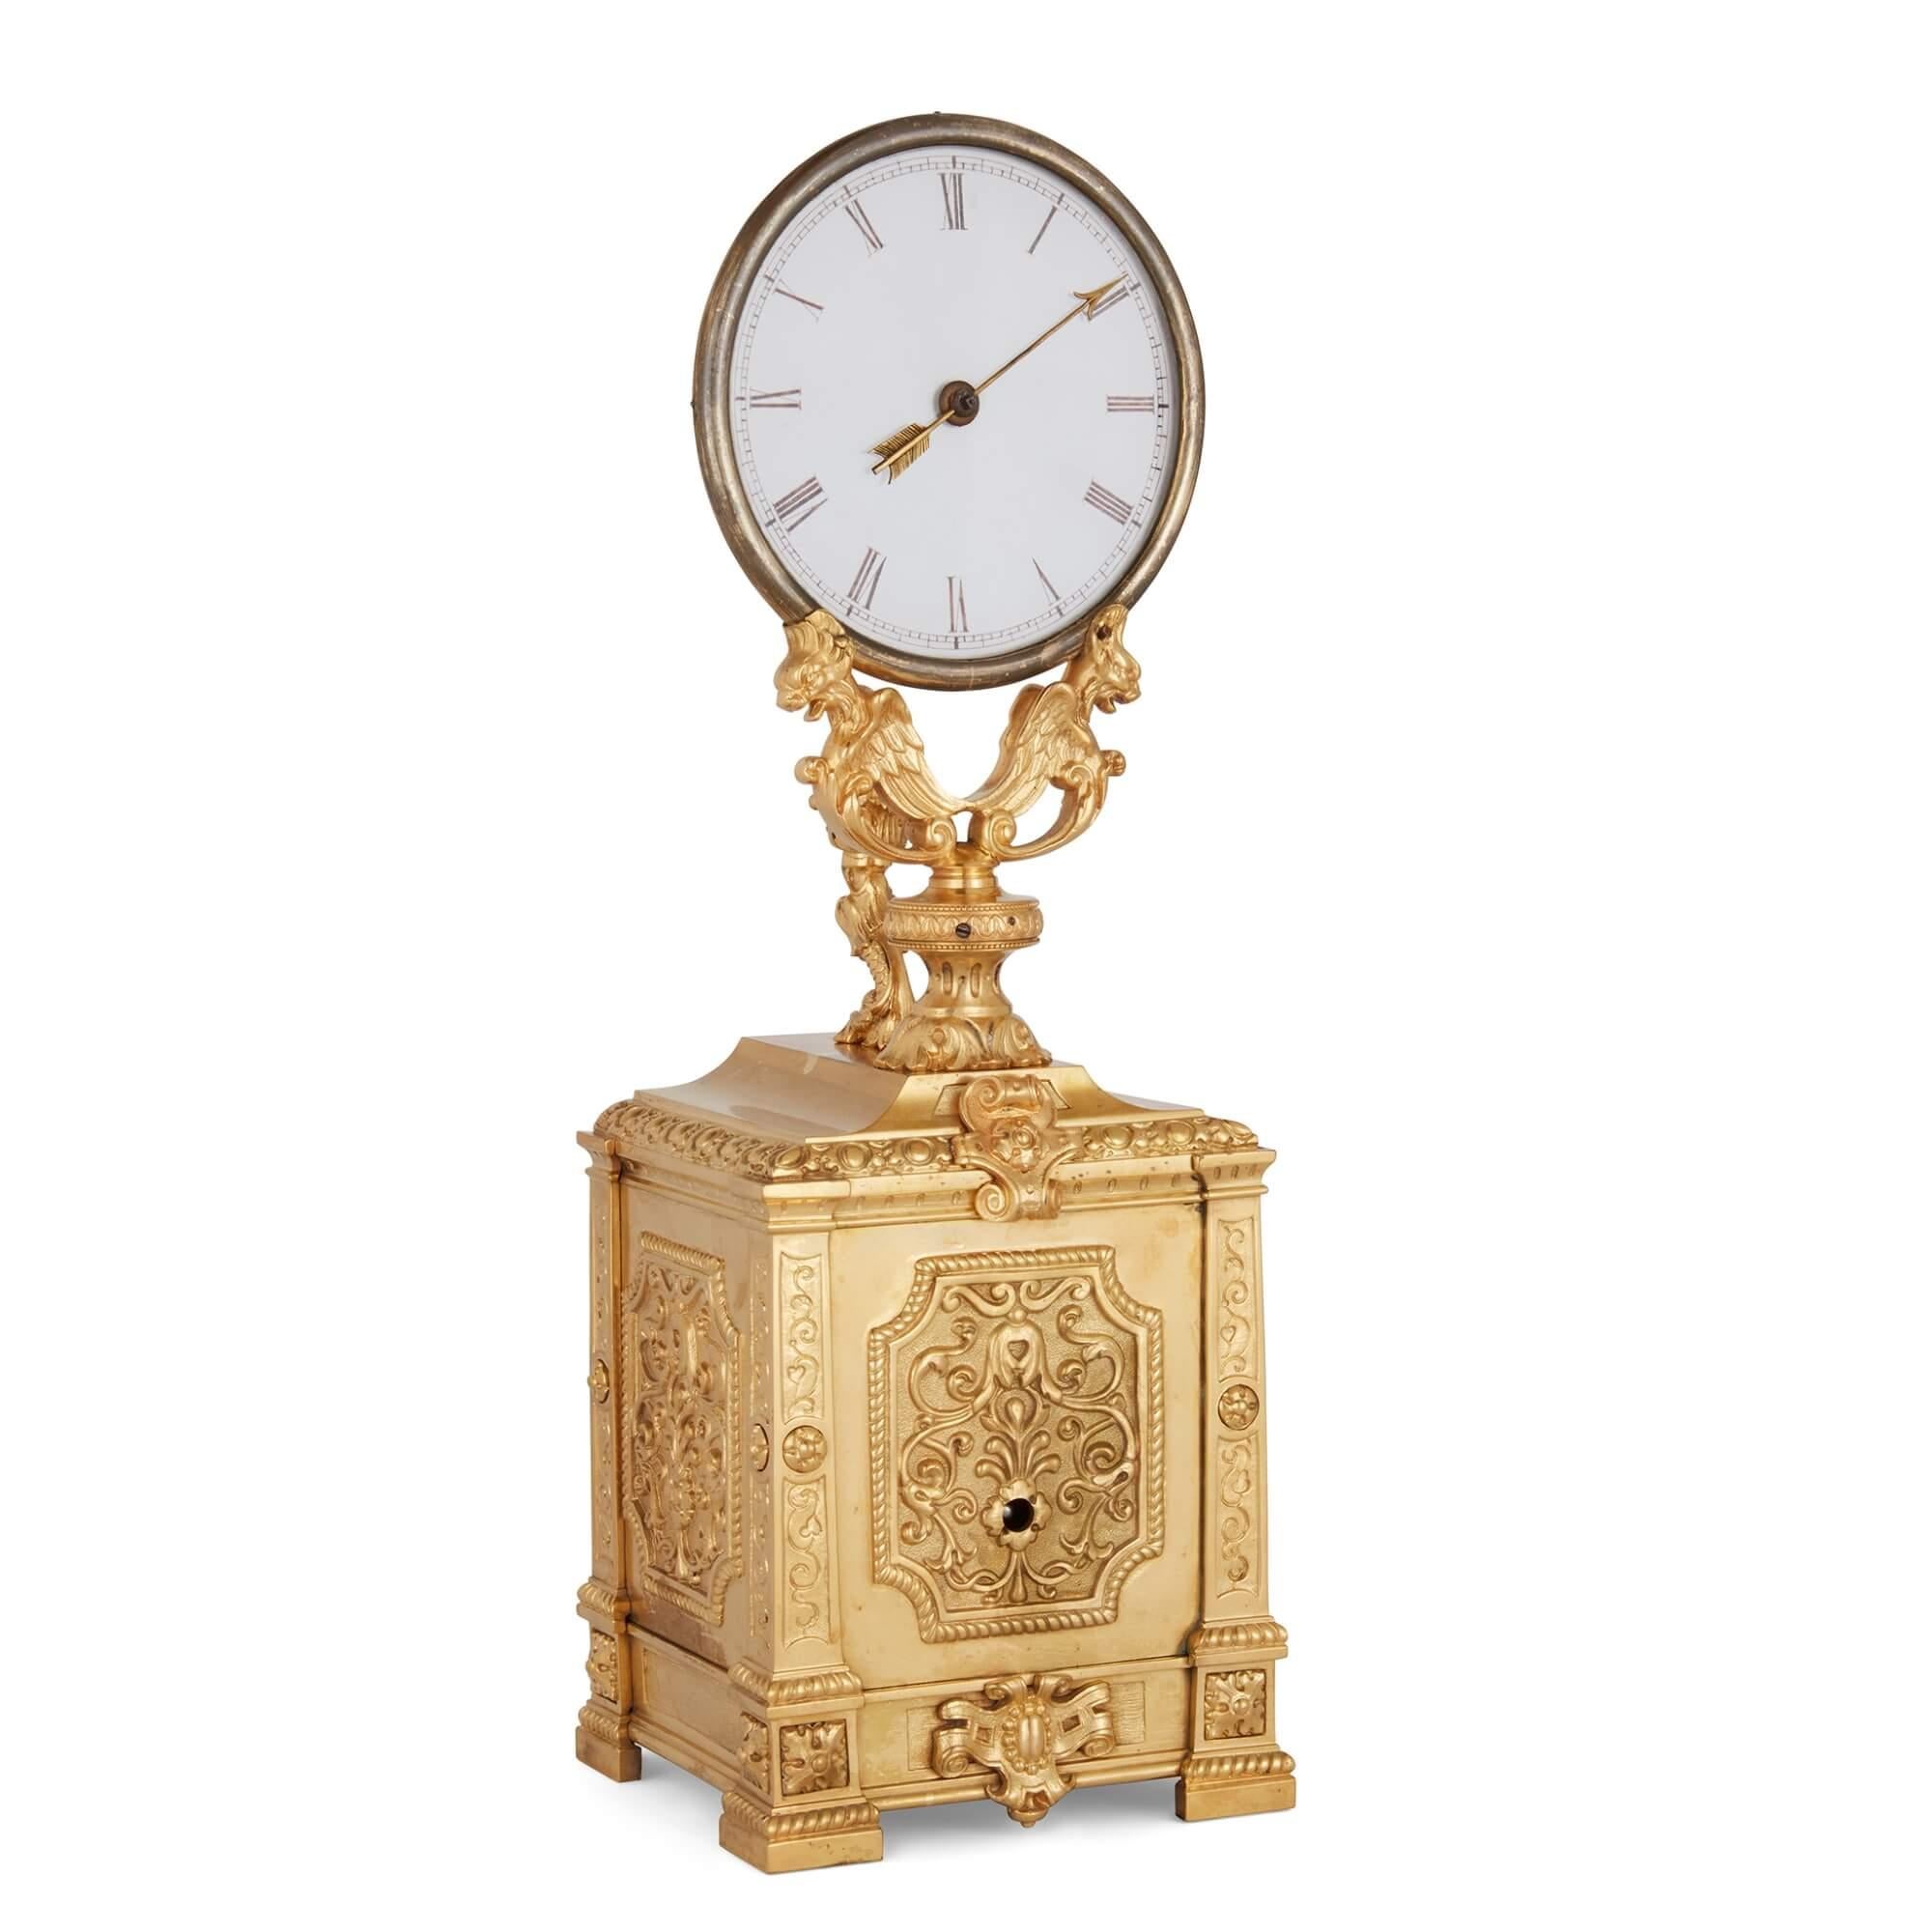 Antique gilt brass and frosted glass mystery clock by Robert-Houdin
French, c. 1850
Height 35cm, width 12cm, depth 11cm

This intriguing mantel clock from the mid-19th century is by Jean Eugene Robert-Houdin (French, 1805-1871). He was a renowned